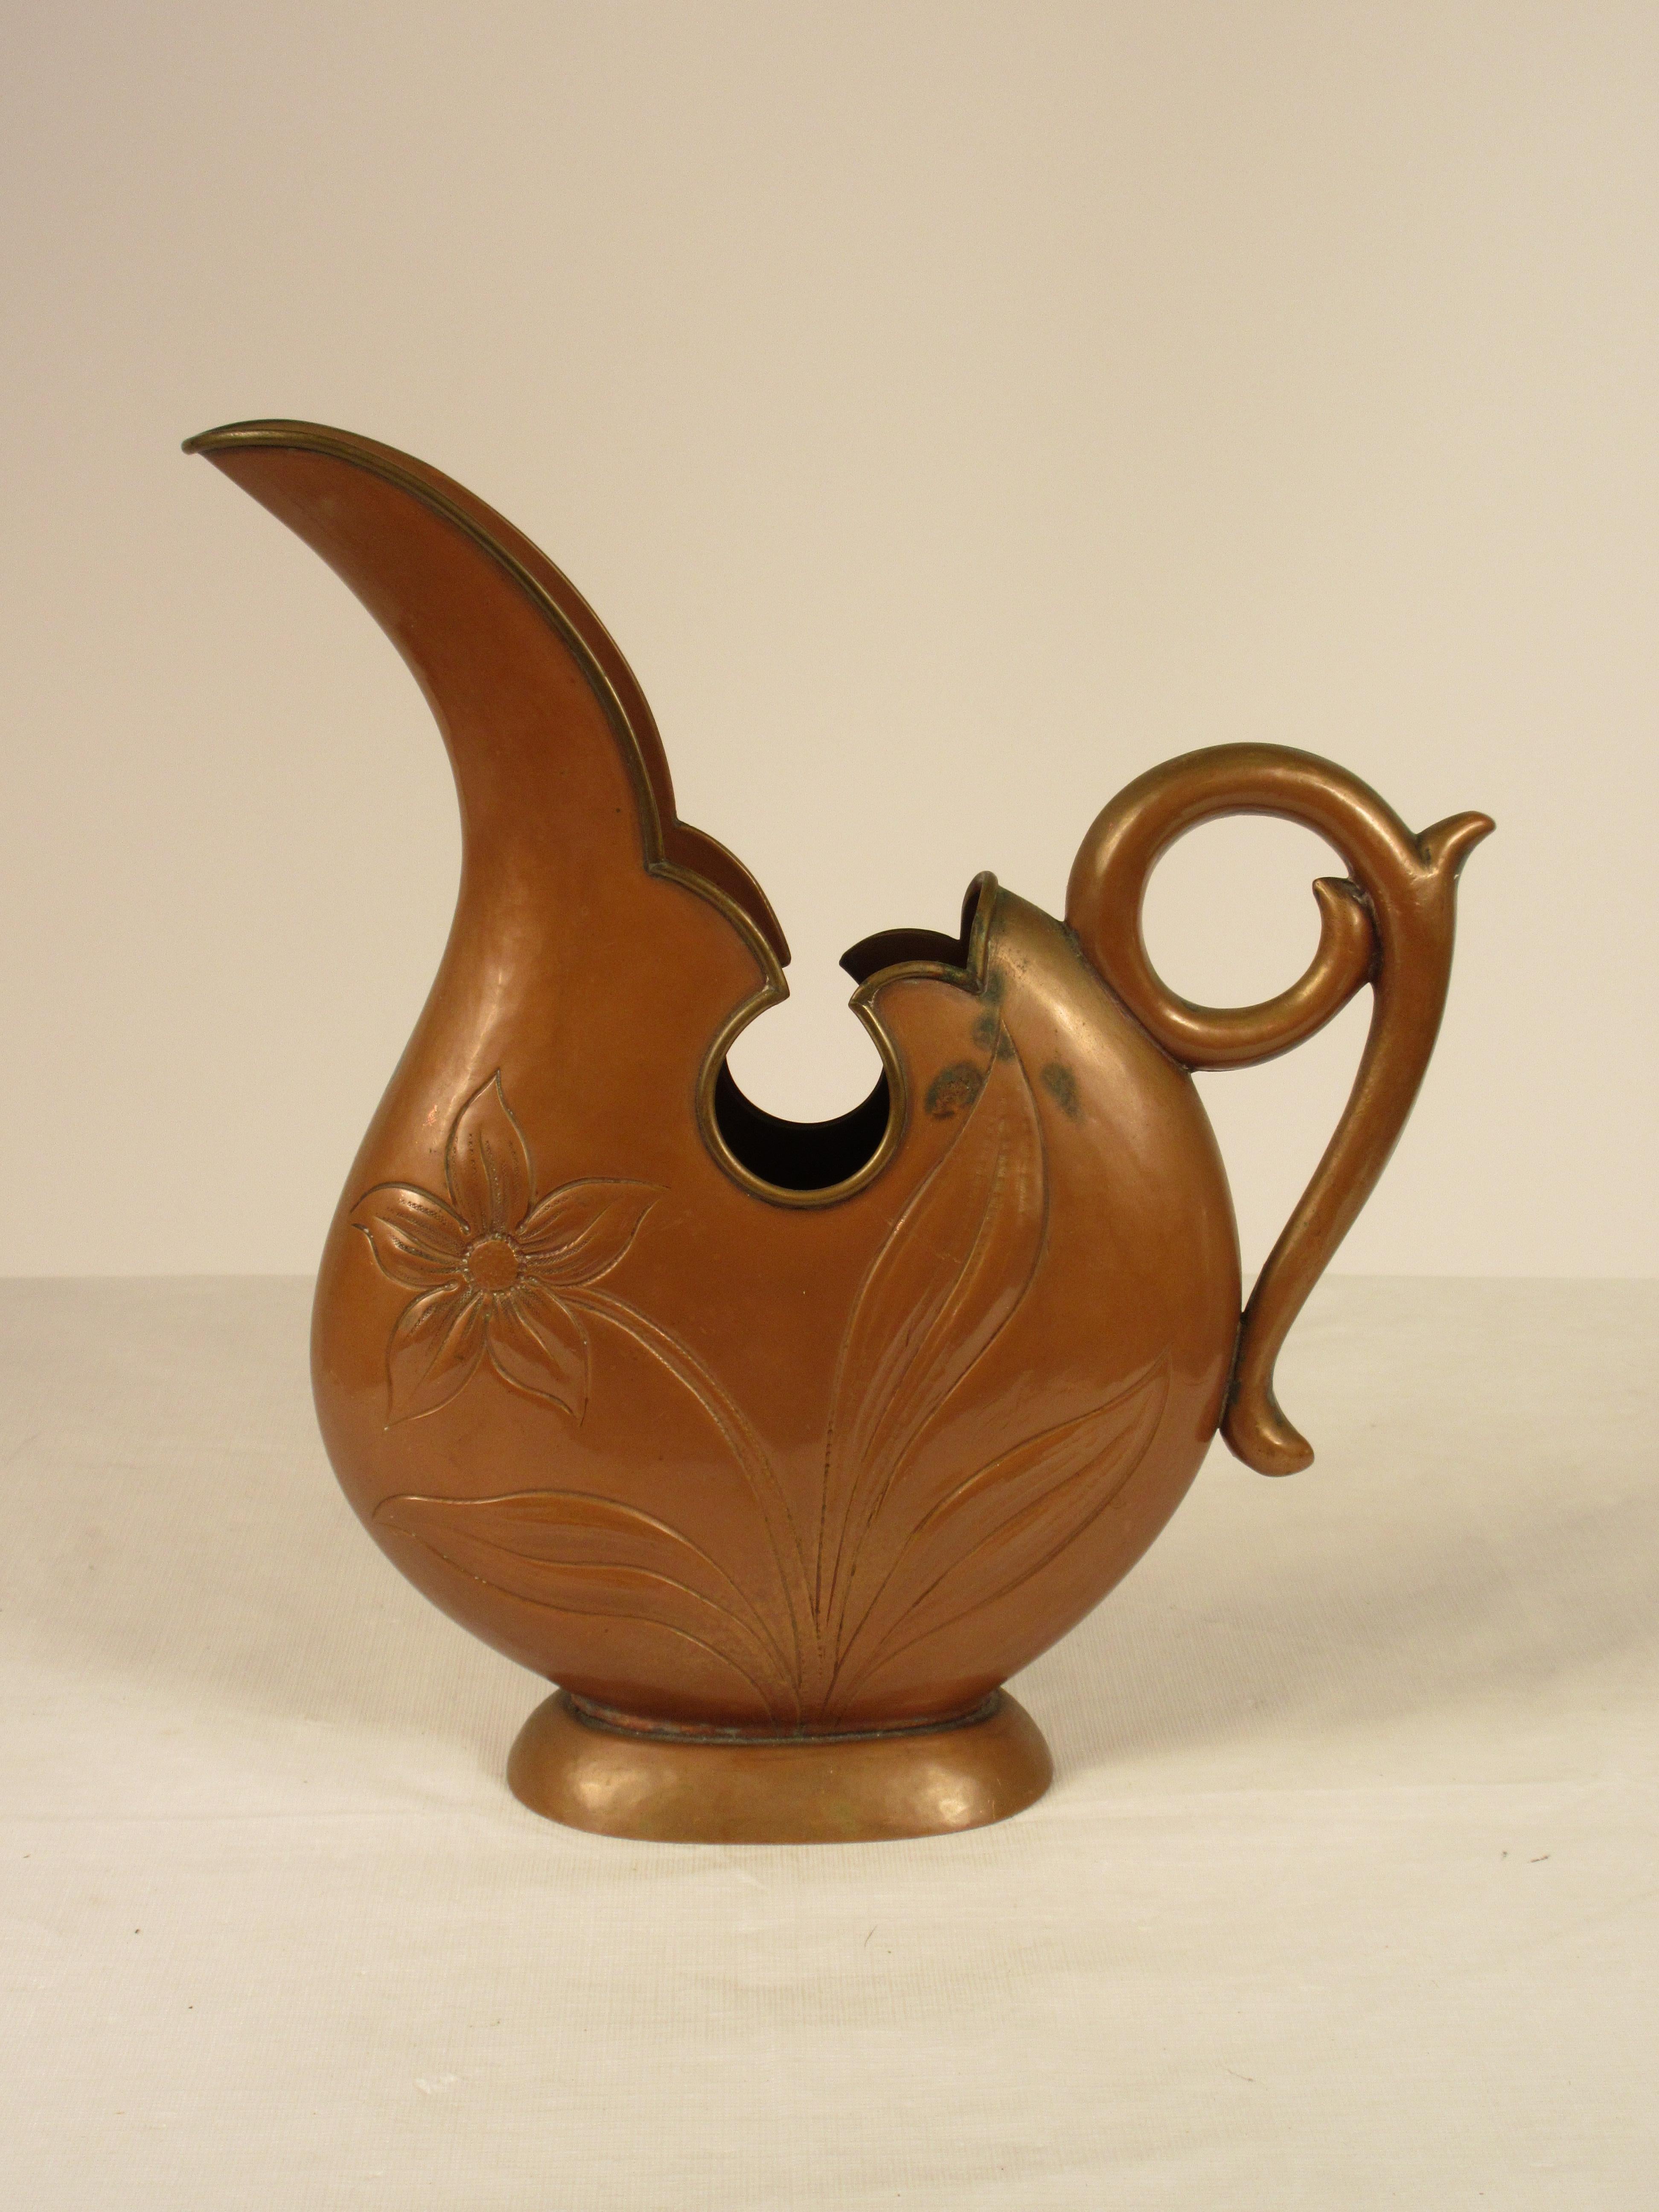 1920s Art Nouveau Copper Pitcher In Good Condition For Sale In Tarrytown, NY